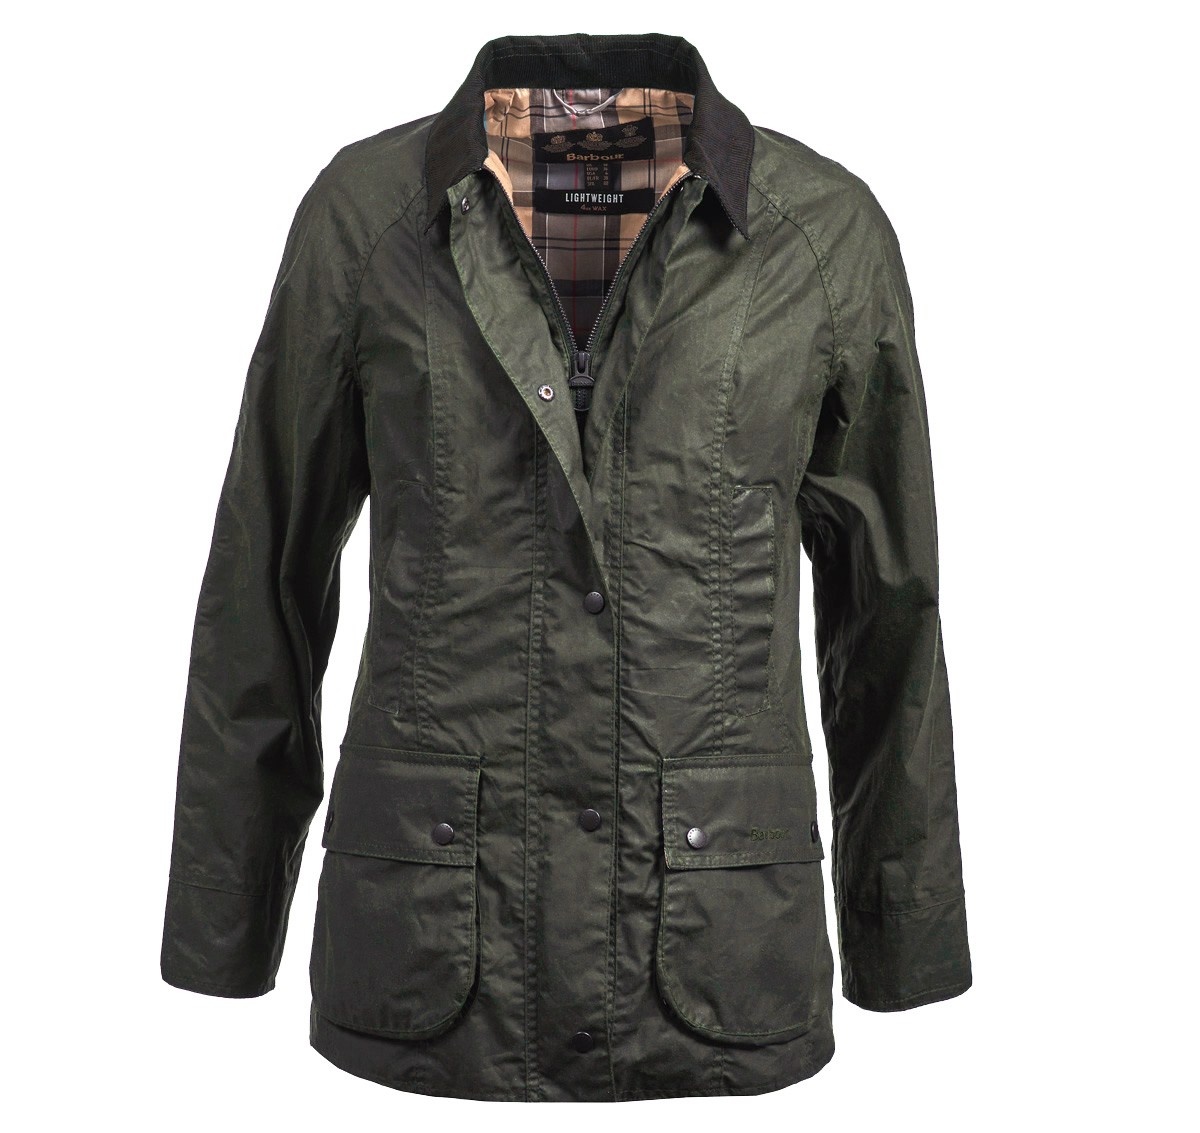 Barbour Wachsjacke L-WT Beadnell  Archive olive